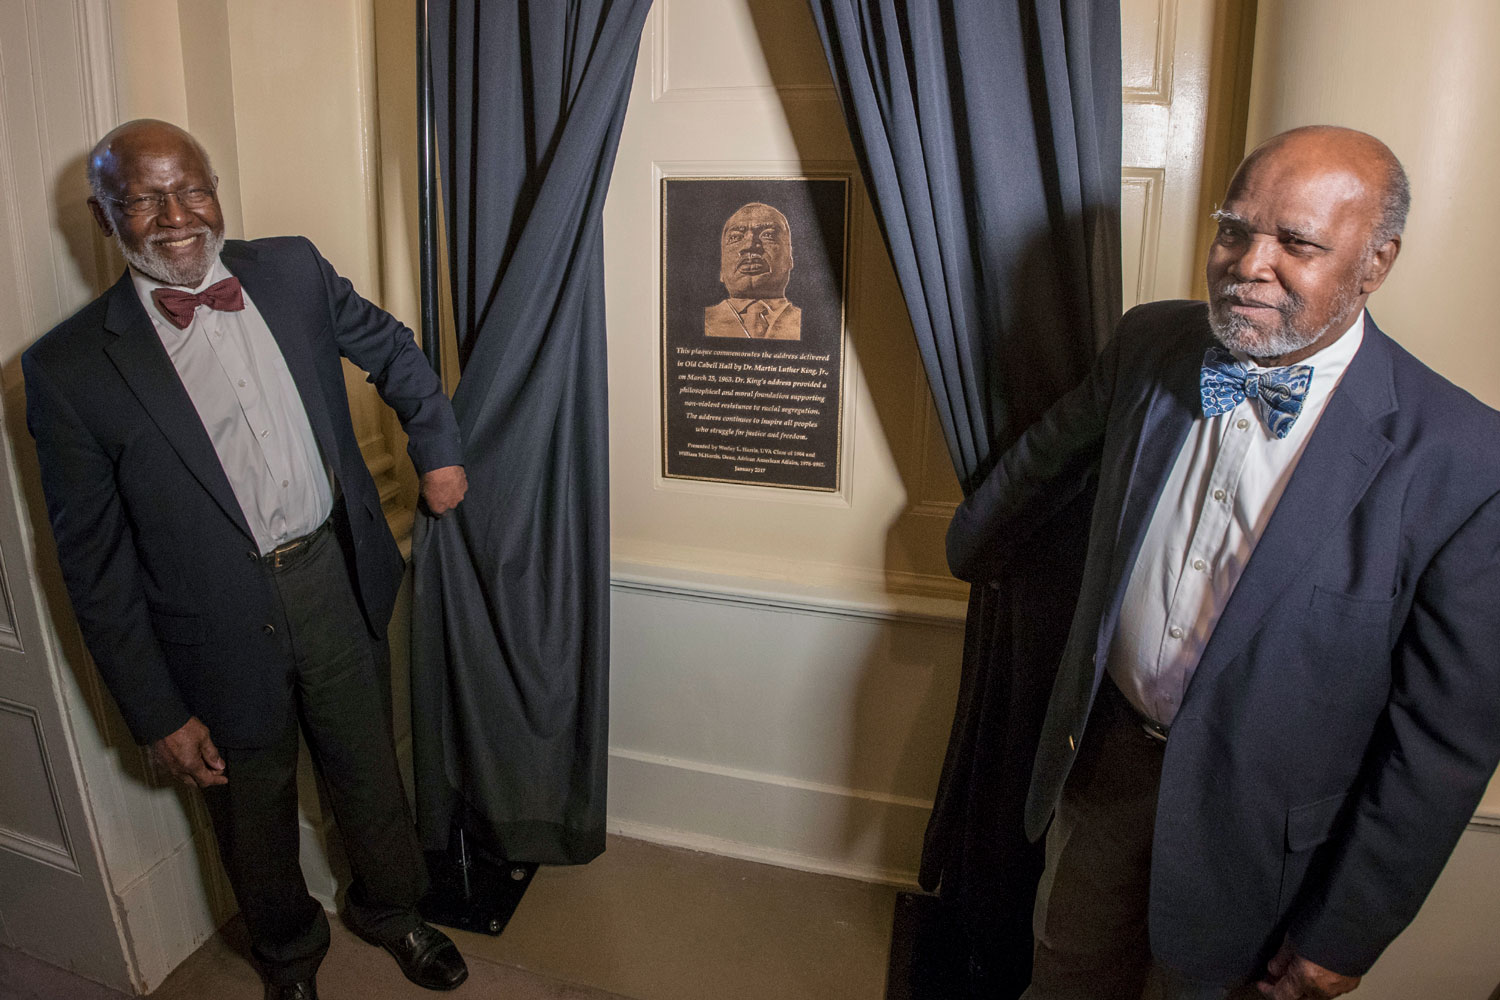 Wesley and William Harris hold blue curtains to show a plaque commemorating Rev. Dr. Martin Luther King Jr.’s appearance at UVA March 25, 1963. 